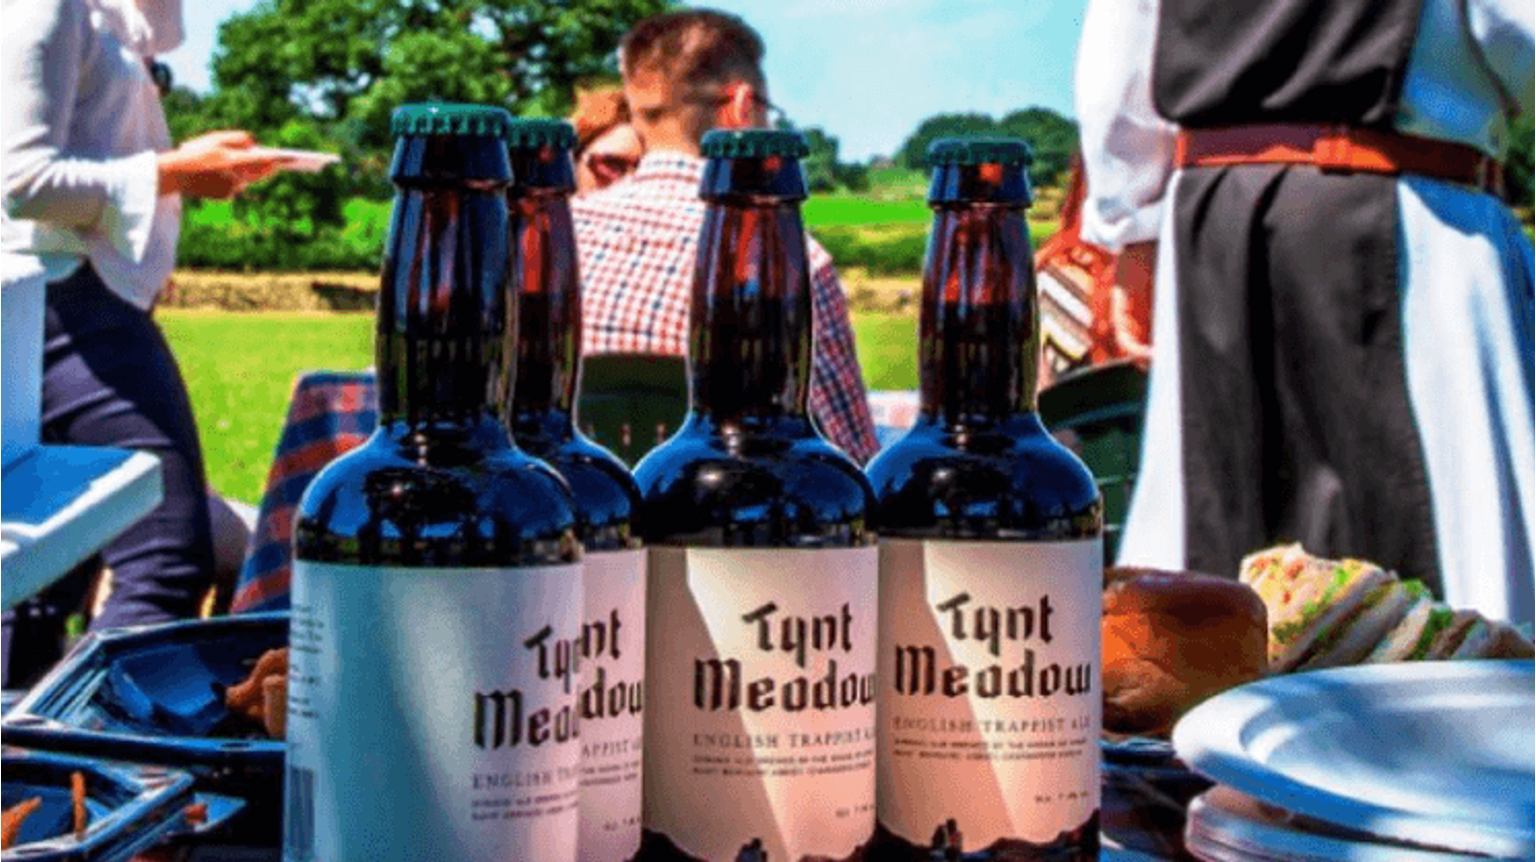 thumbnail for blog article named: Tynt Meadow: England's very own Authentic Trappist Beer